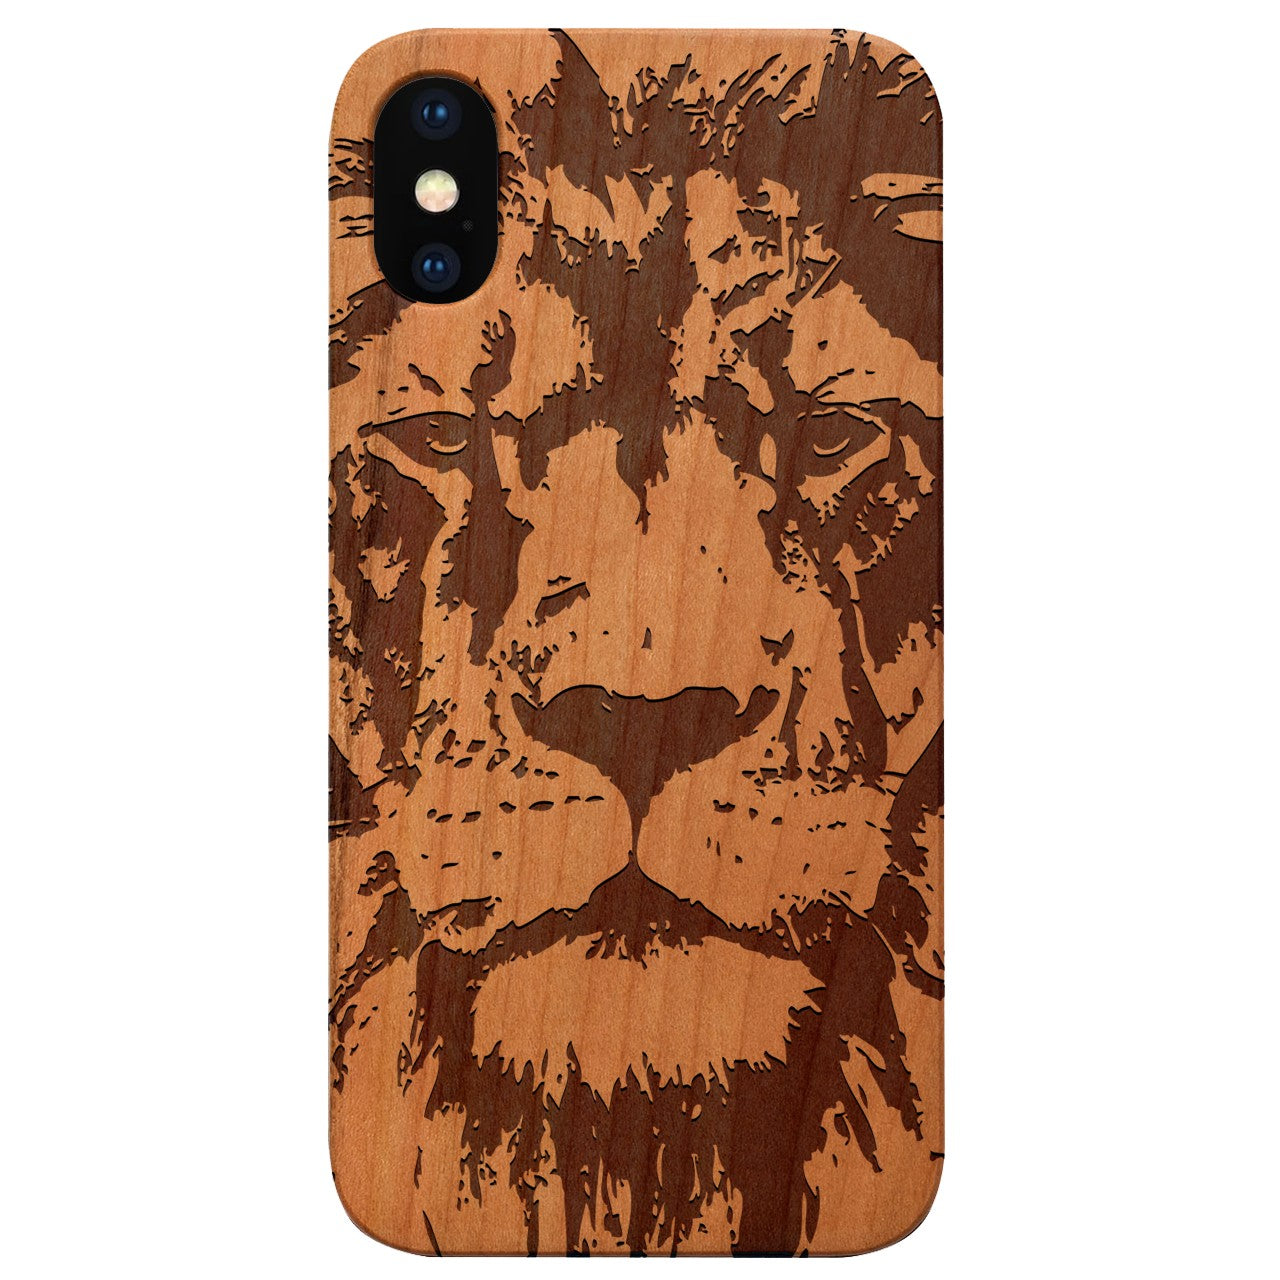  Lion Face 4 - Engraved - Wooden Phone Case - IPhone 13 Models